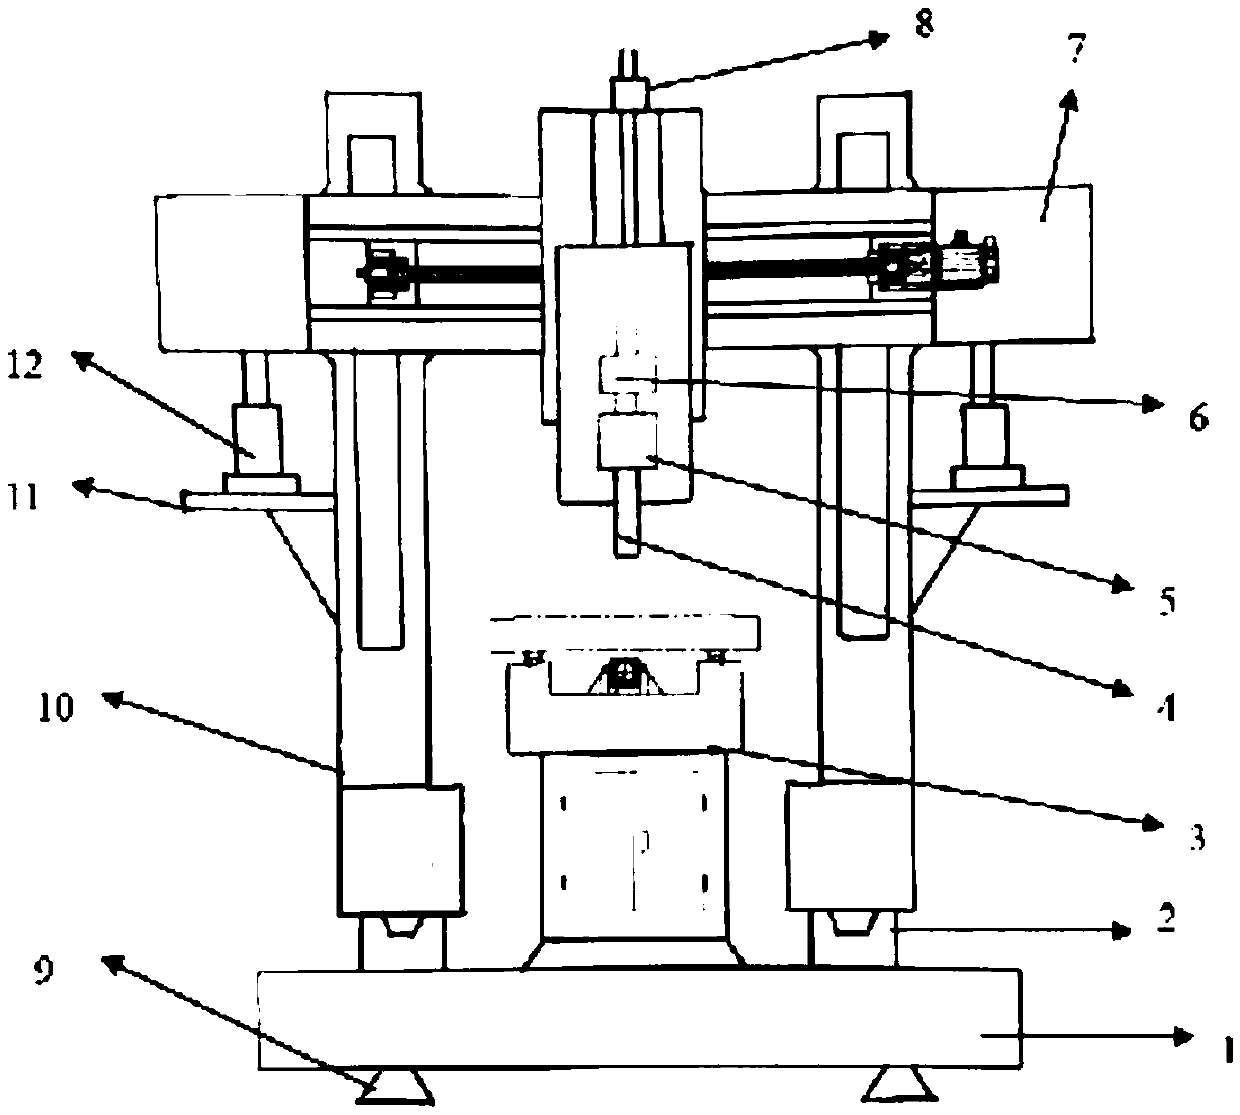 Milling and grinding combined machine tool